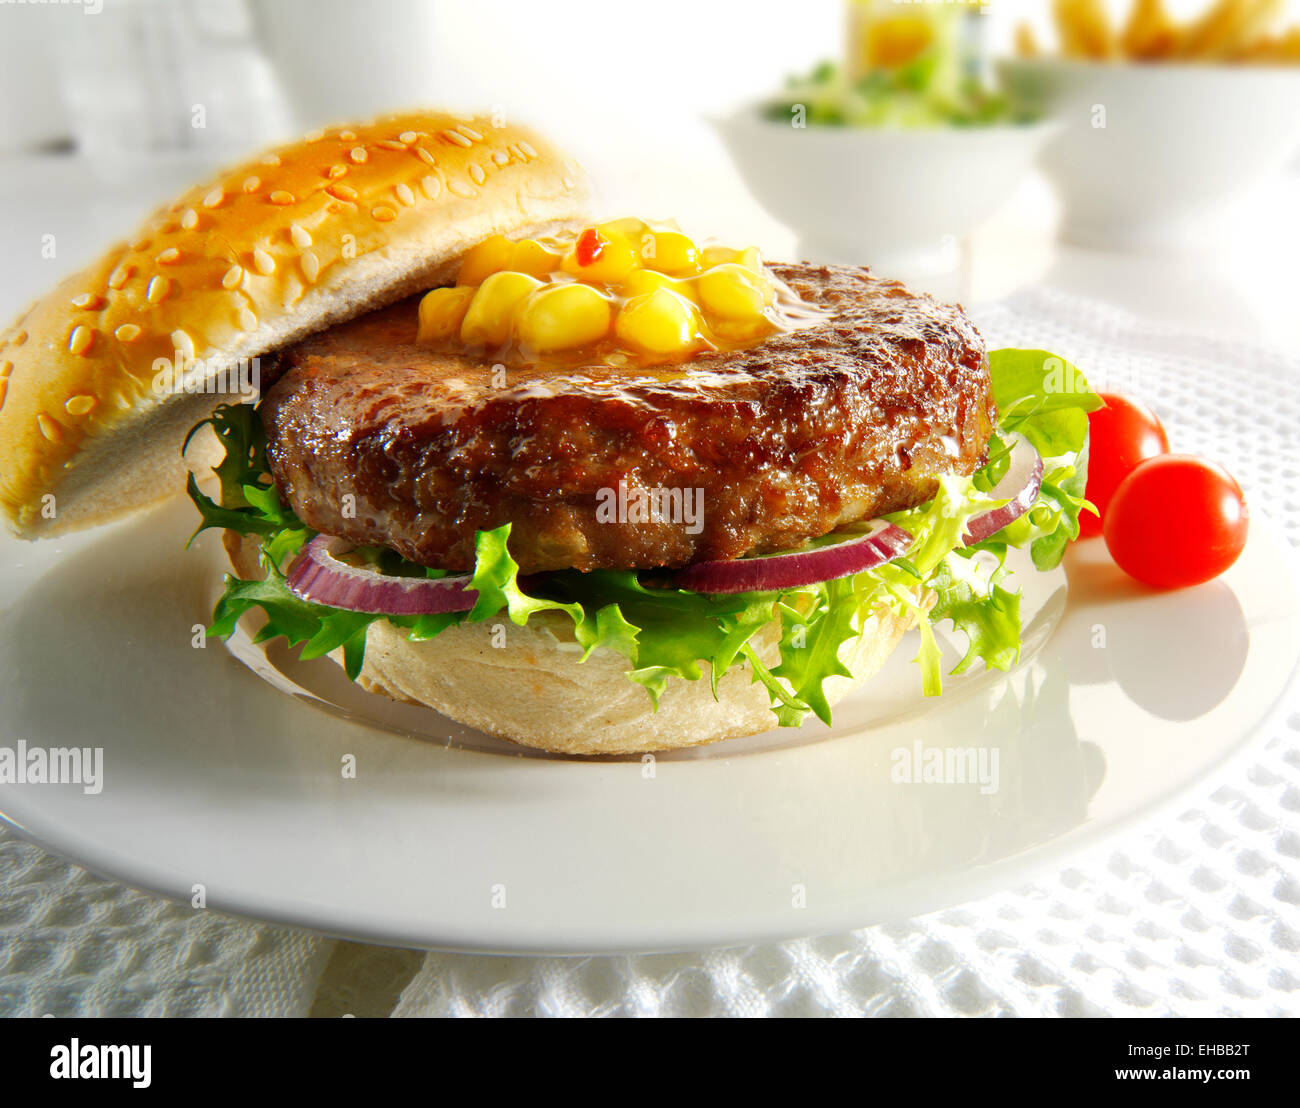 Beef burger with in a bun with salad, fries and sweetcorn relish Stock Photo